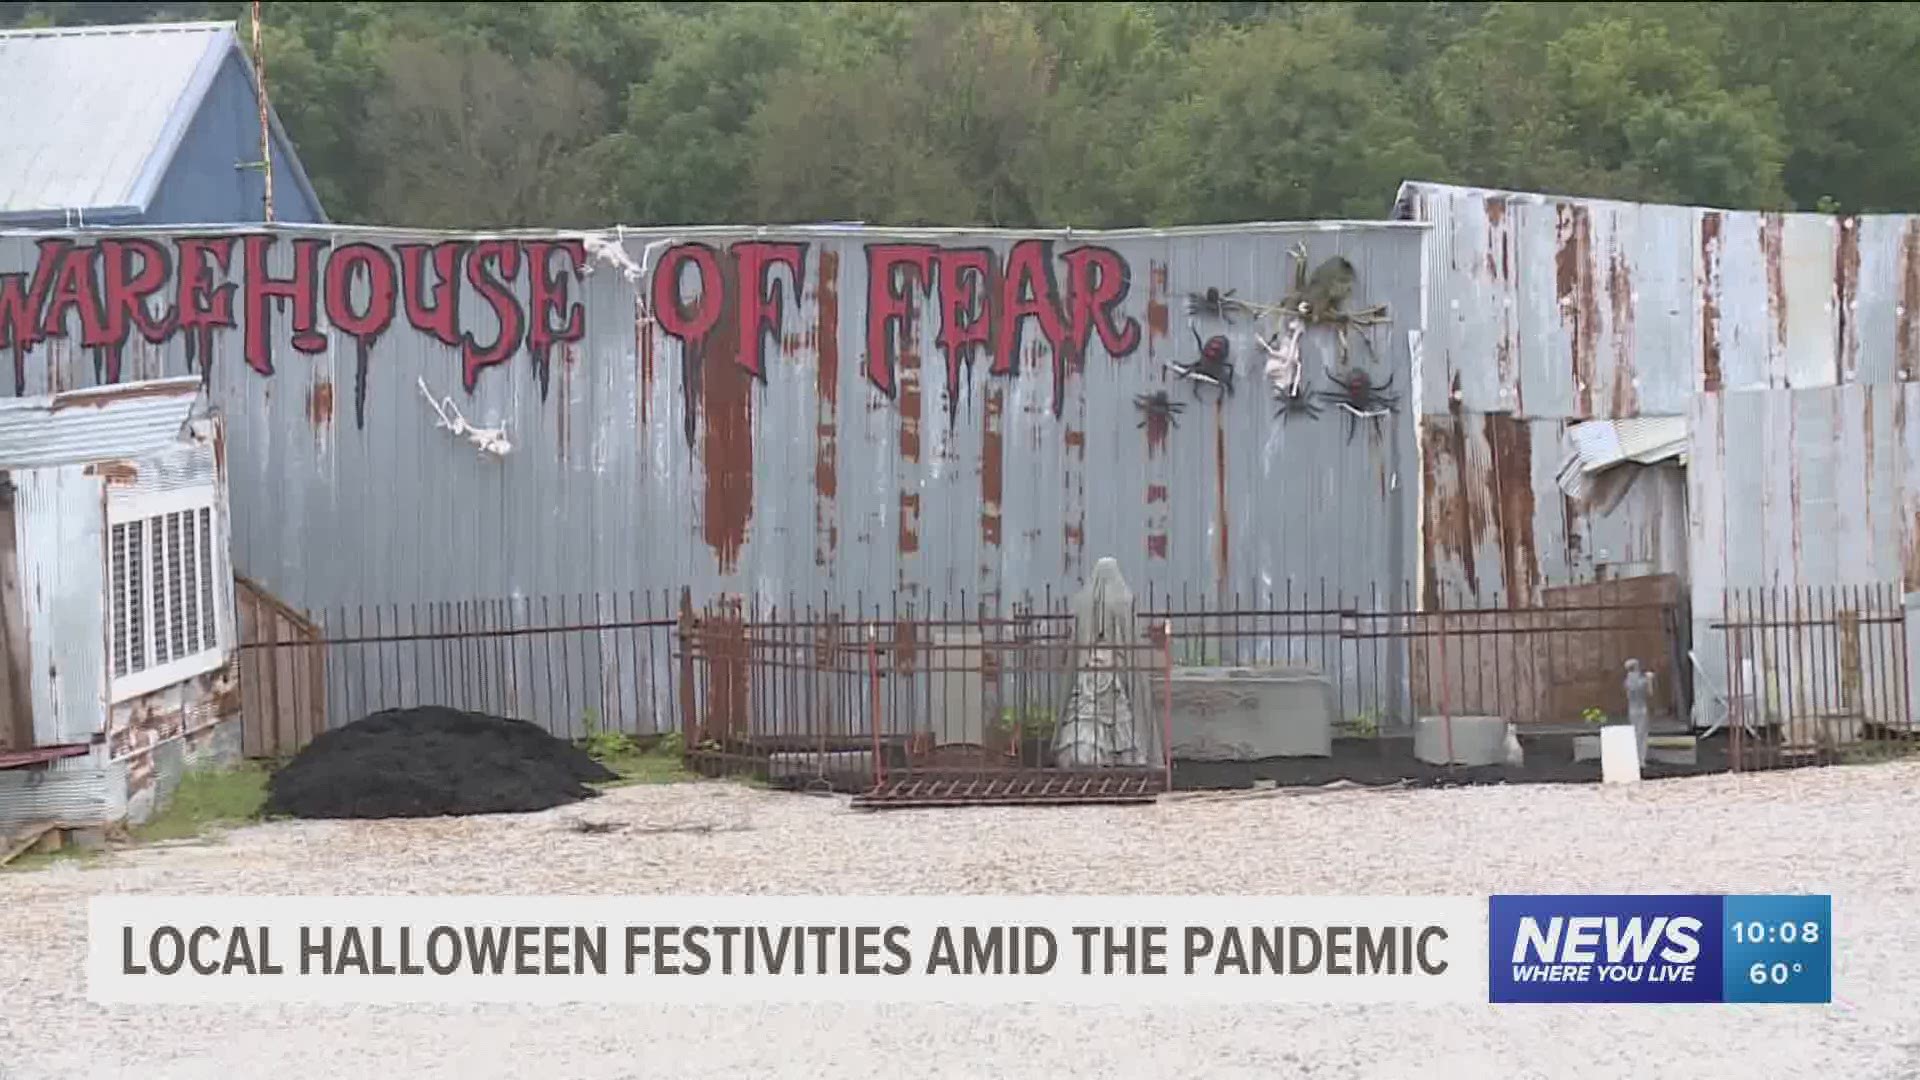 Although the CDC urges against haunted houses this Halloween, some in our area will still be open to visitors.